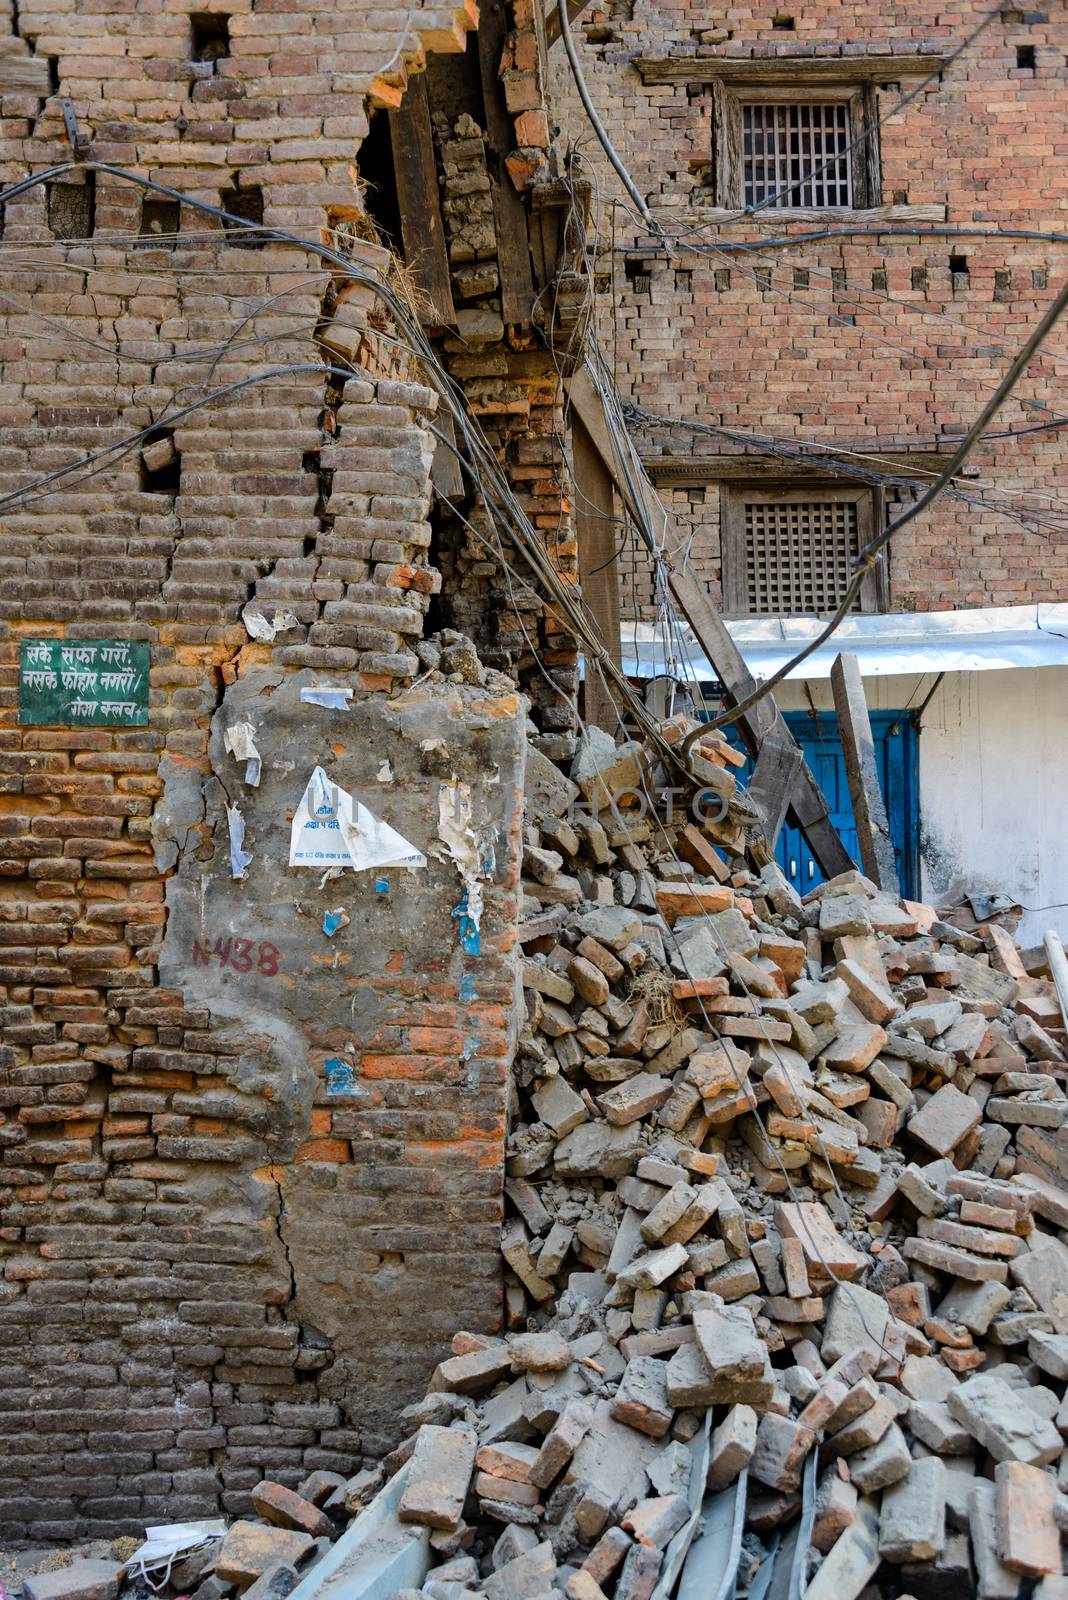 KATHMANDU, NEPAL - MAY 14, 2015: Damaged building and rubble after two major earthquakes hit Nepal in the past weeks.